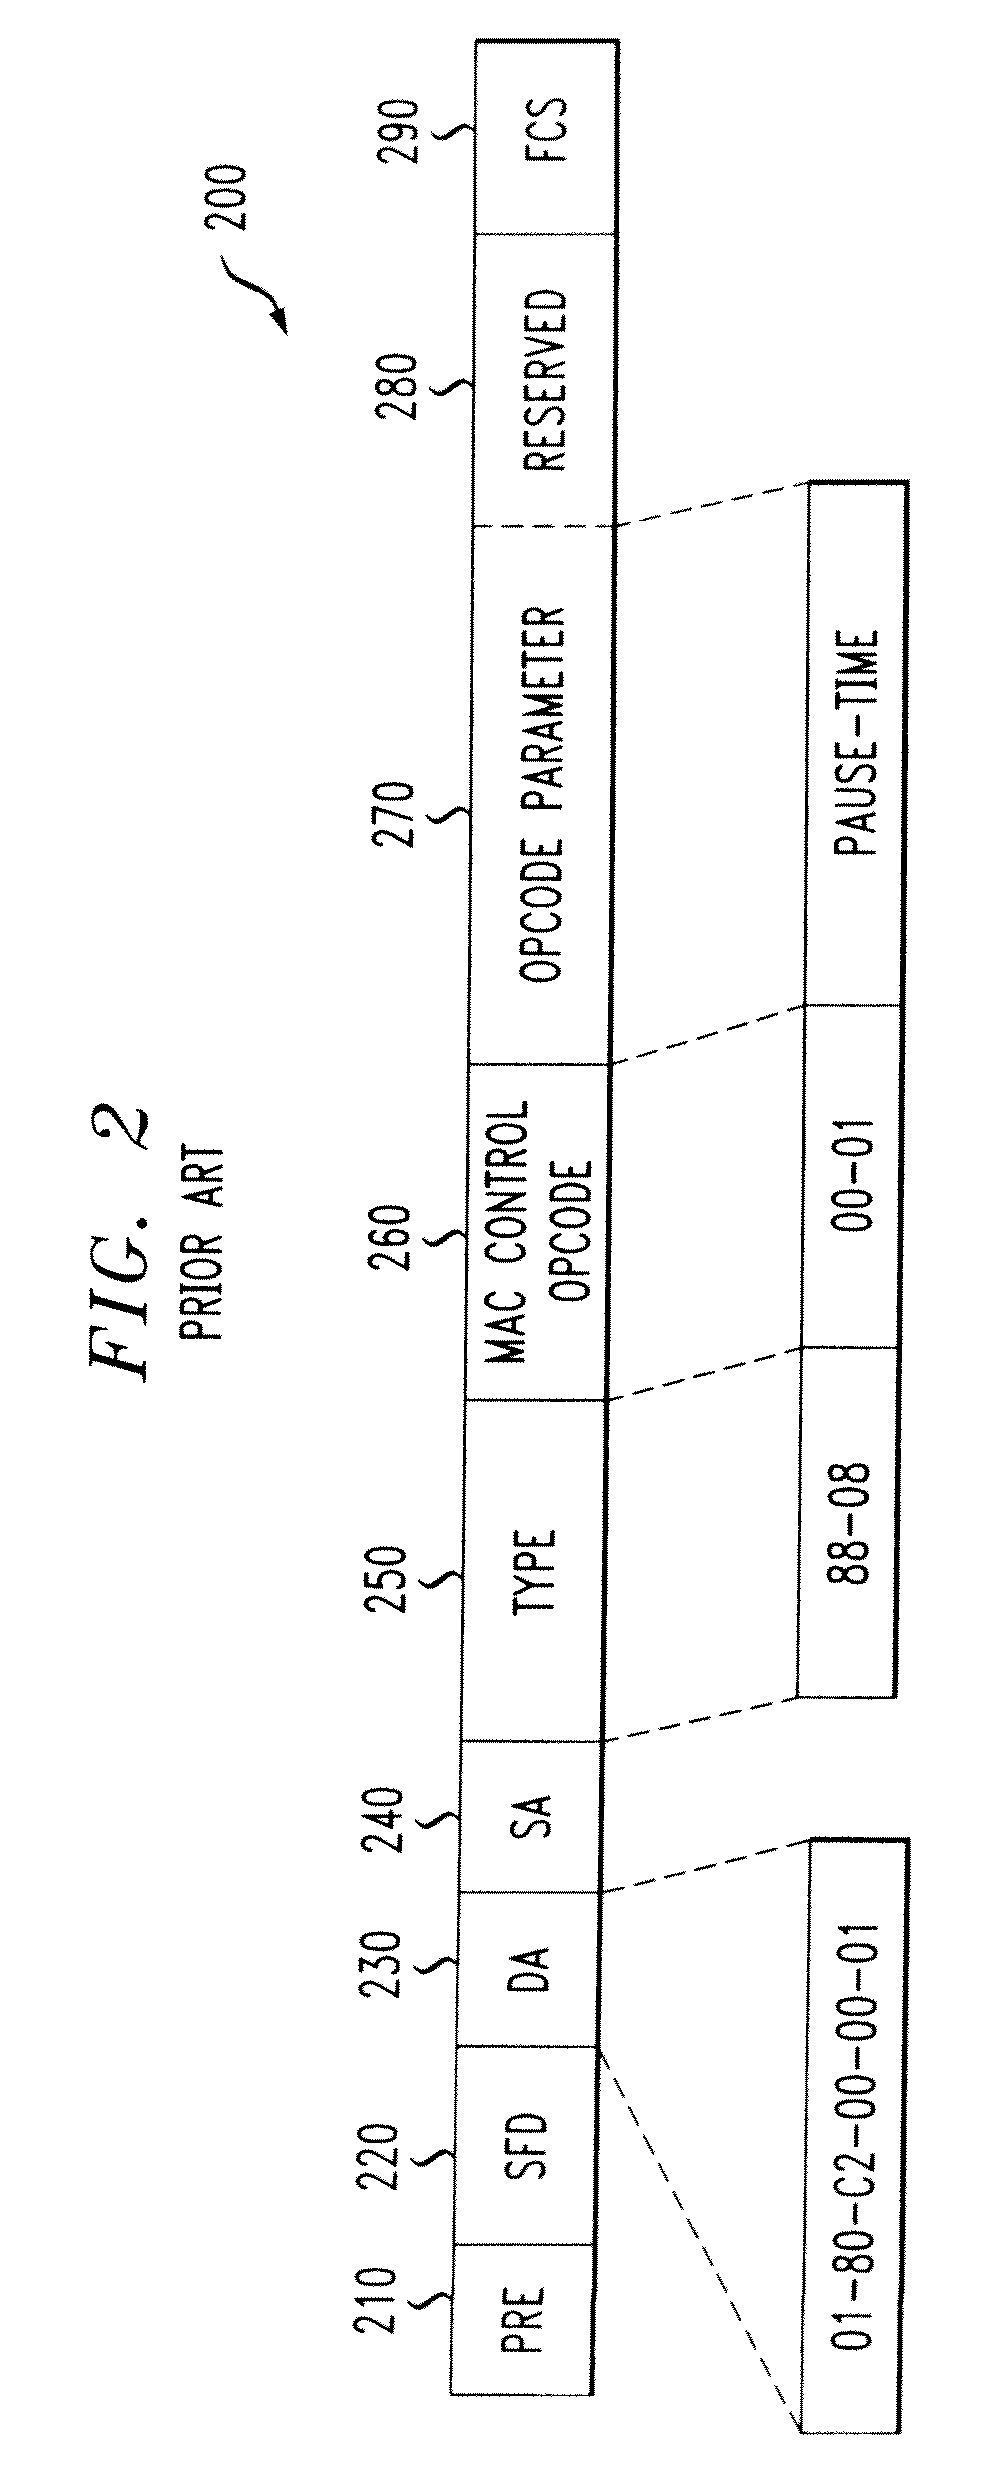 Method For Per-Port Flow Control Of Packets Aggregated From Multiple Logical Ports Over A Transport Link